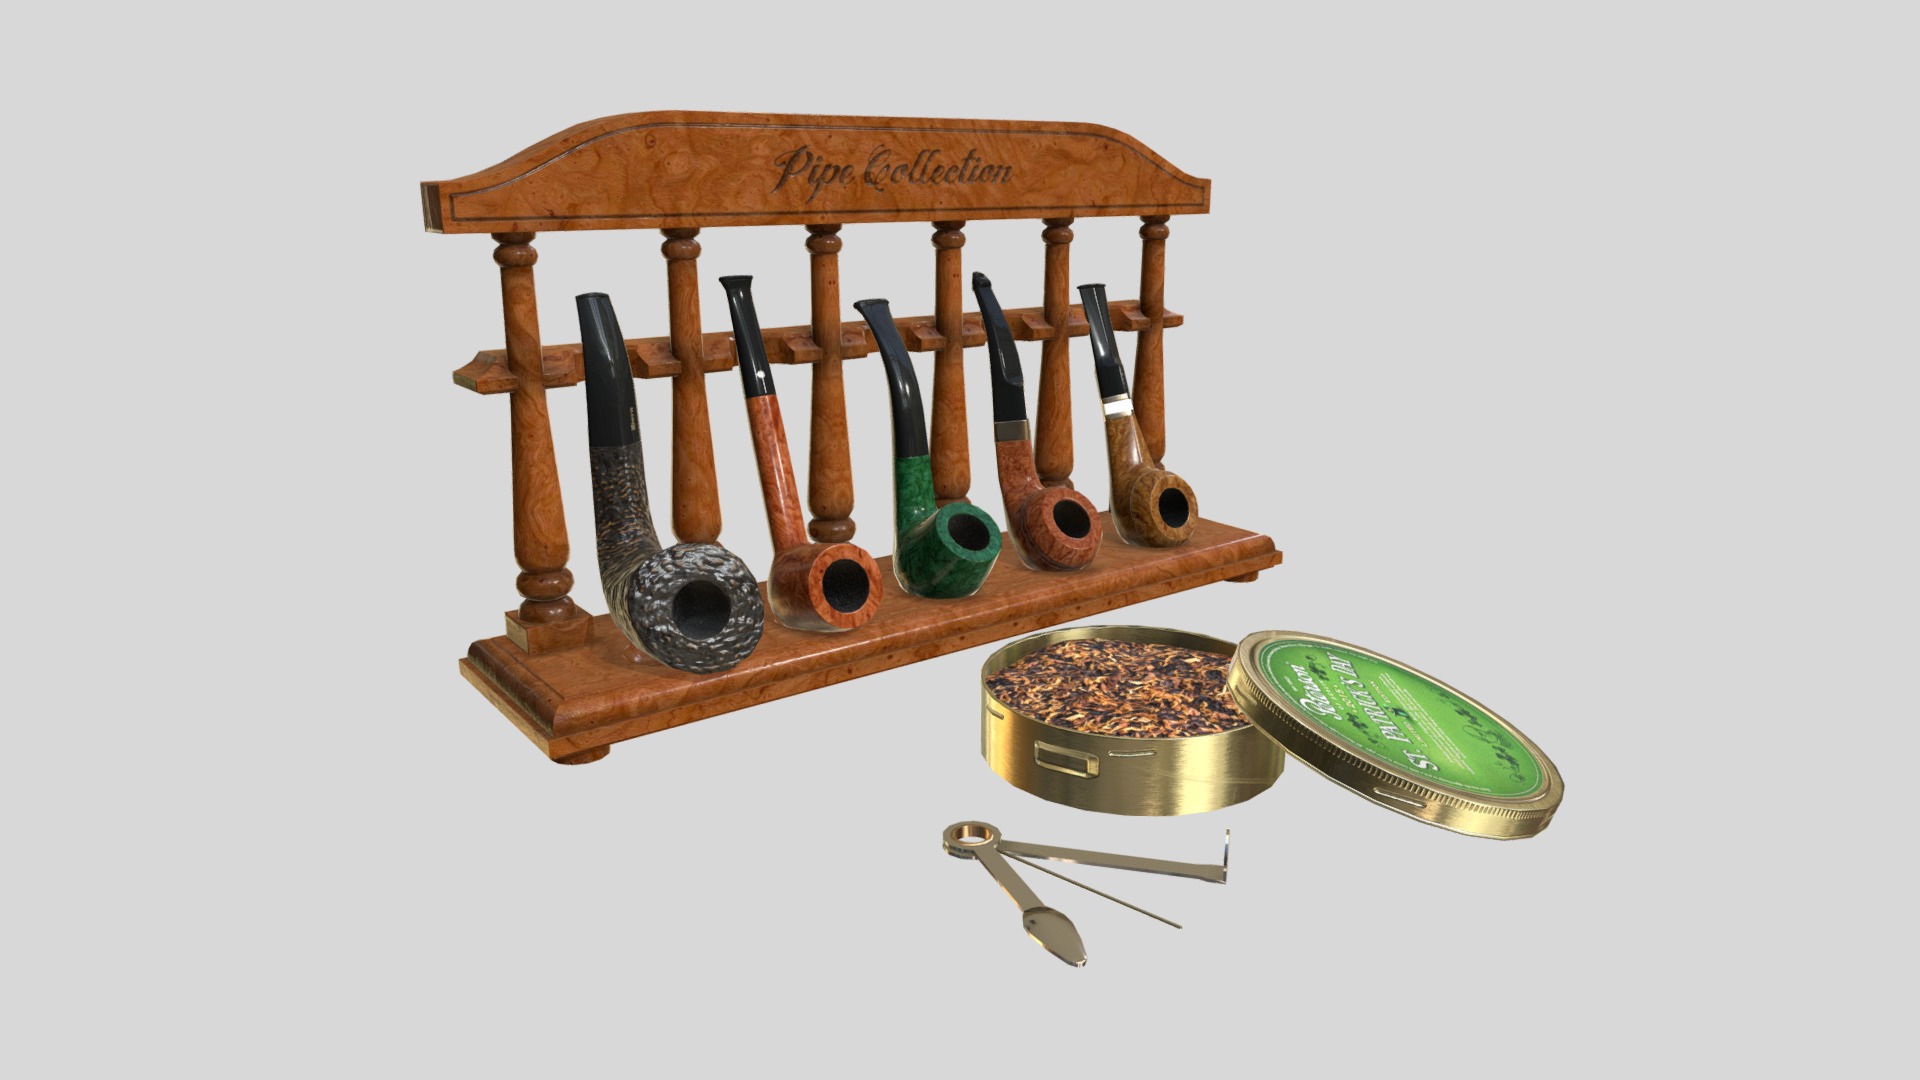 3D model Smoking Briar Pipe Set - This is a 3D model of the Smoking Briar Pipe Set. The 3D model is about a wooden table with a few metal bowls and a metal bowl.